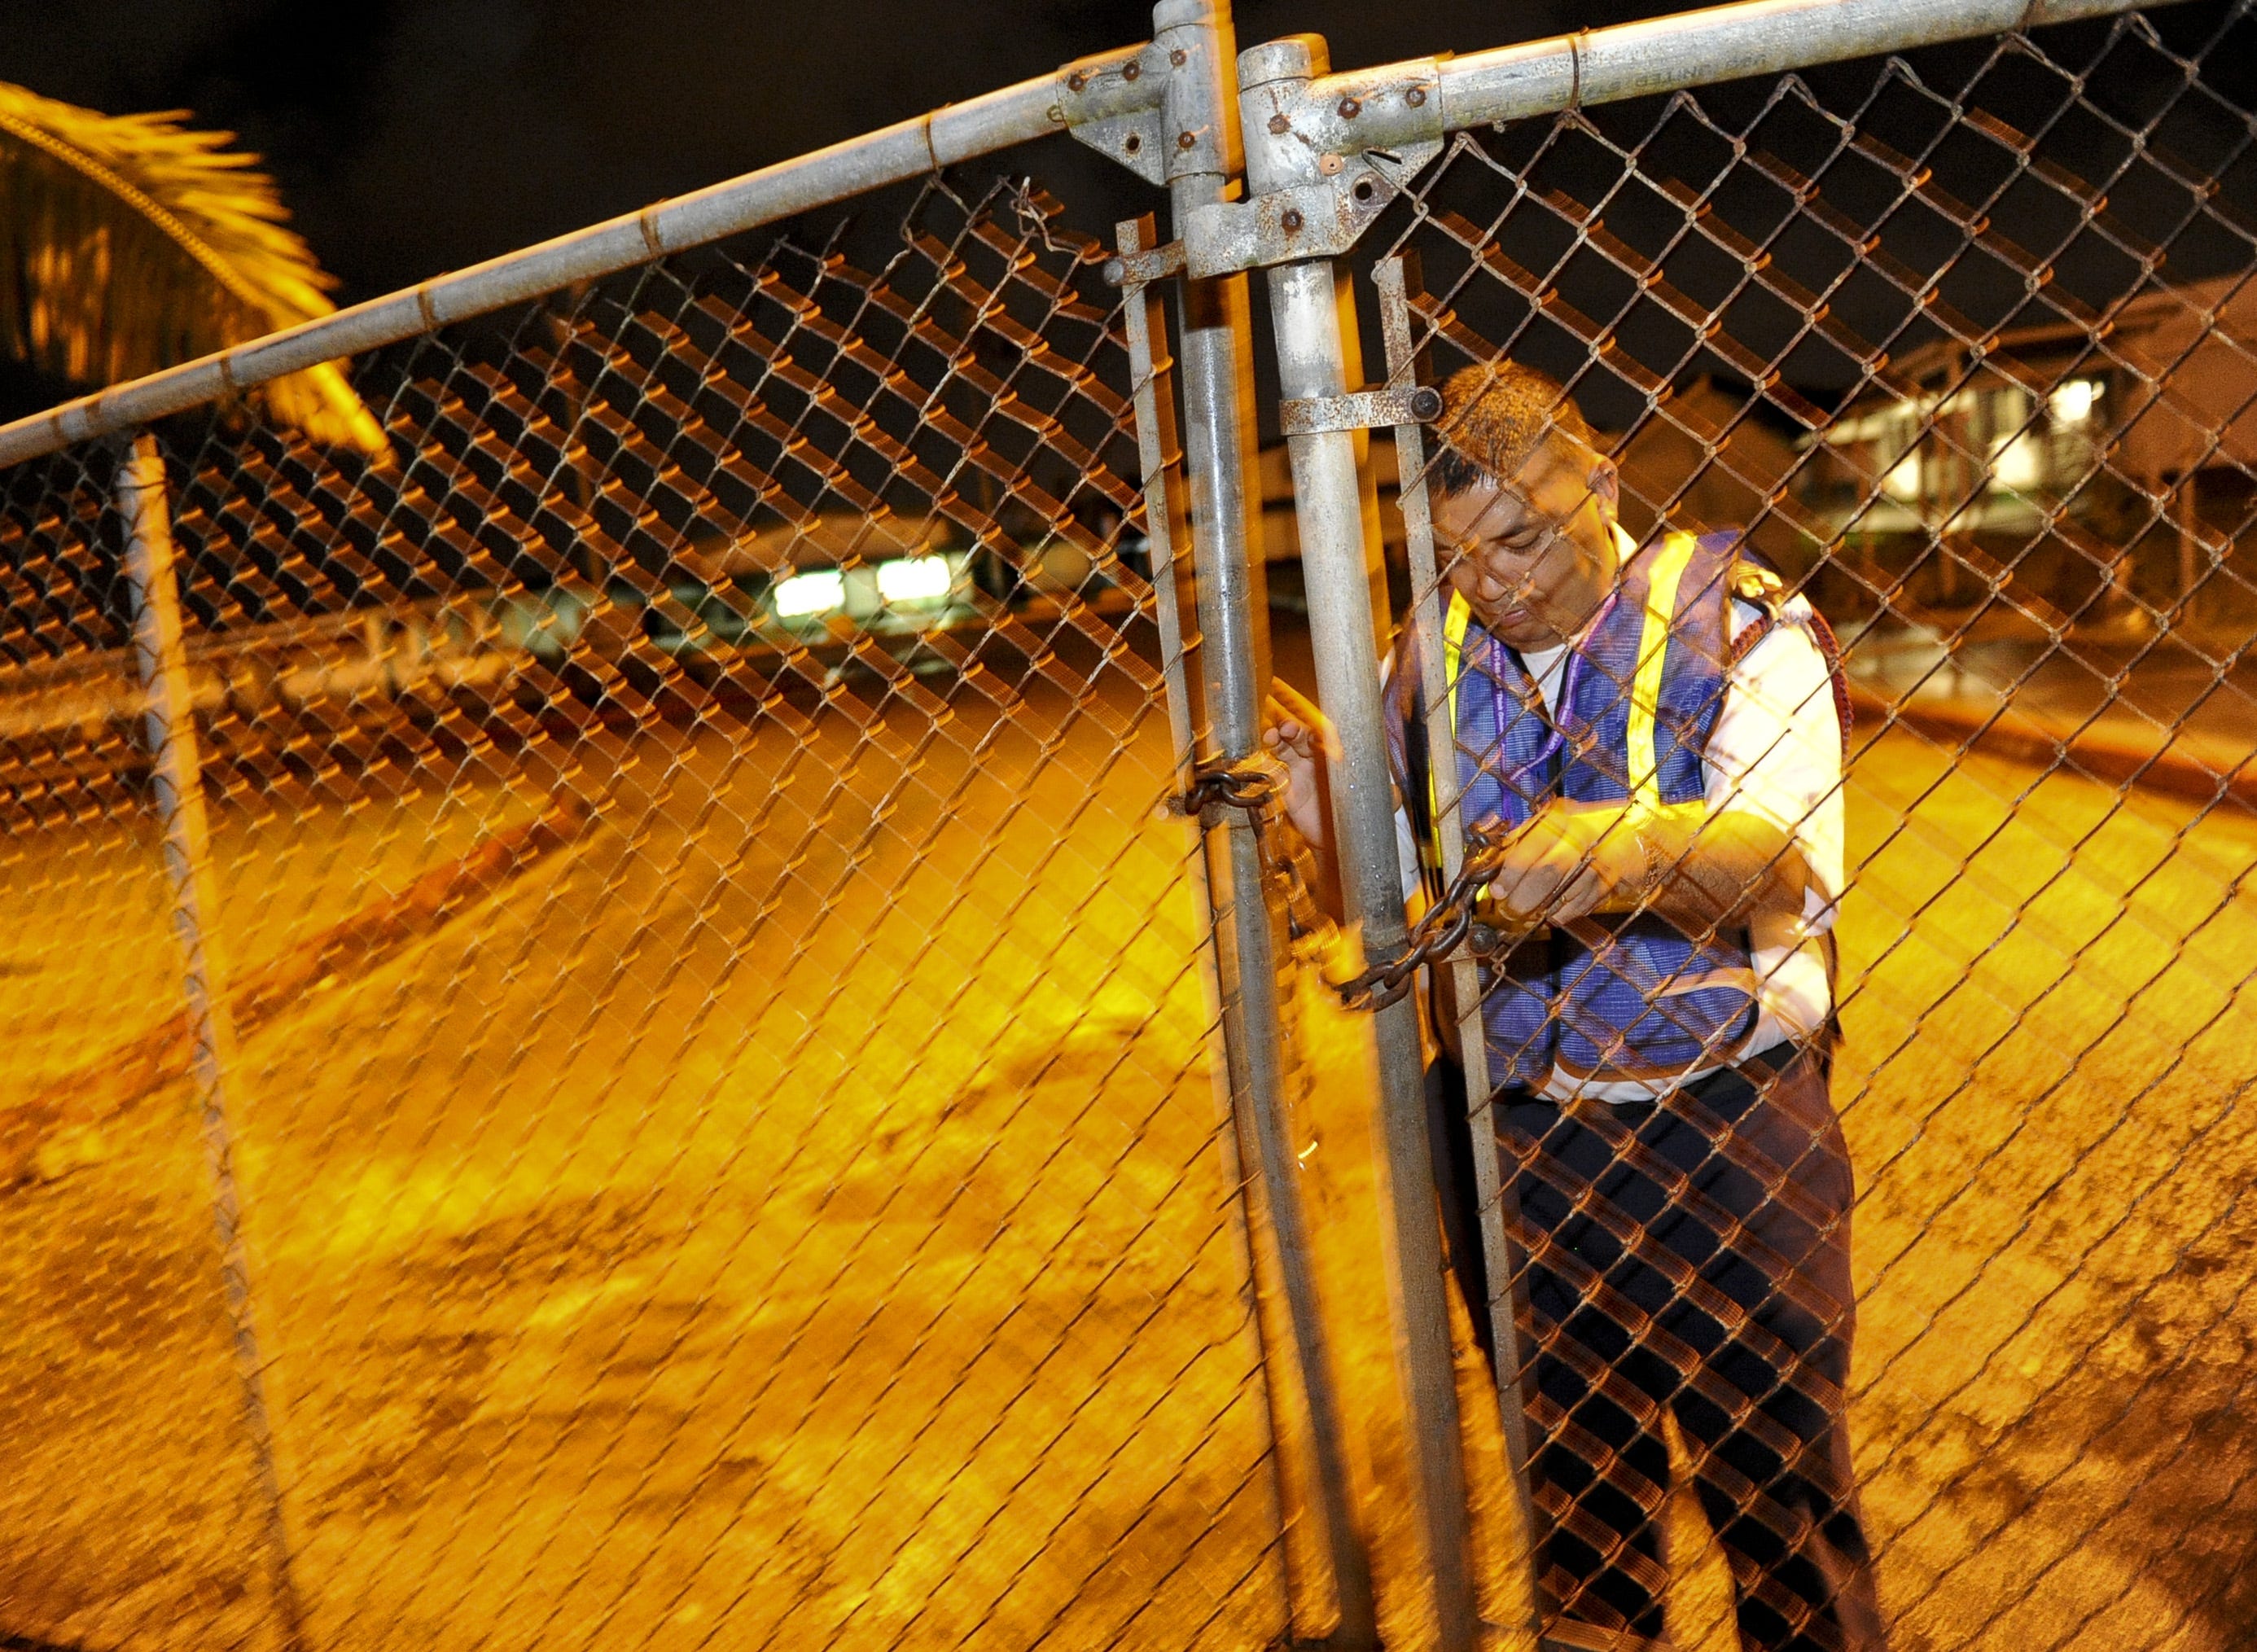 A G4S guard uses a chain and padlock to secure the main gate to elementary school in Guam in 2012. G4S employs 546,000 people around the world.